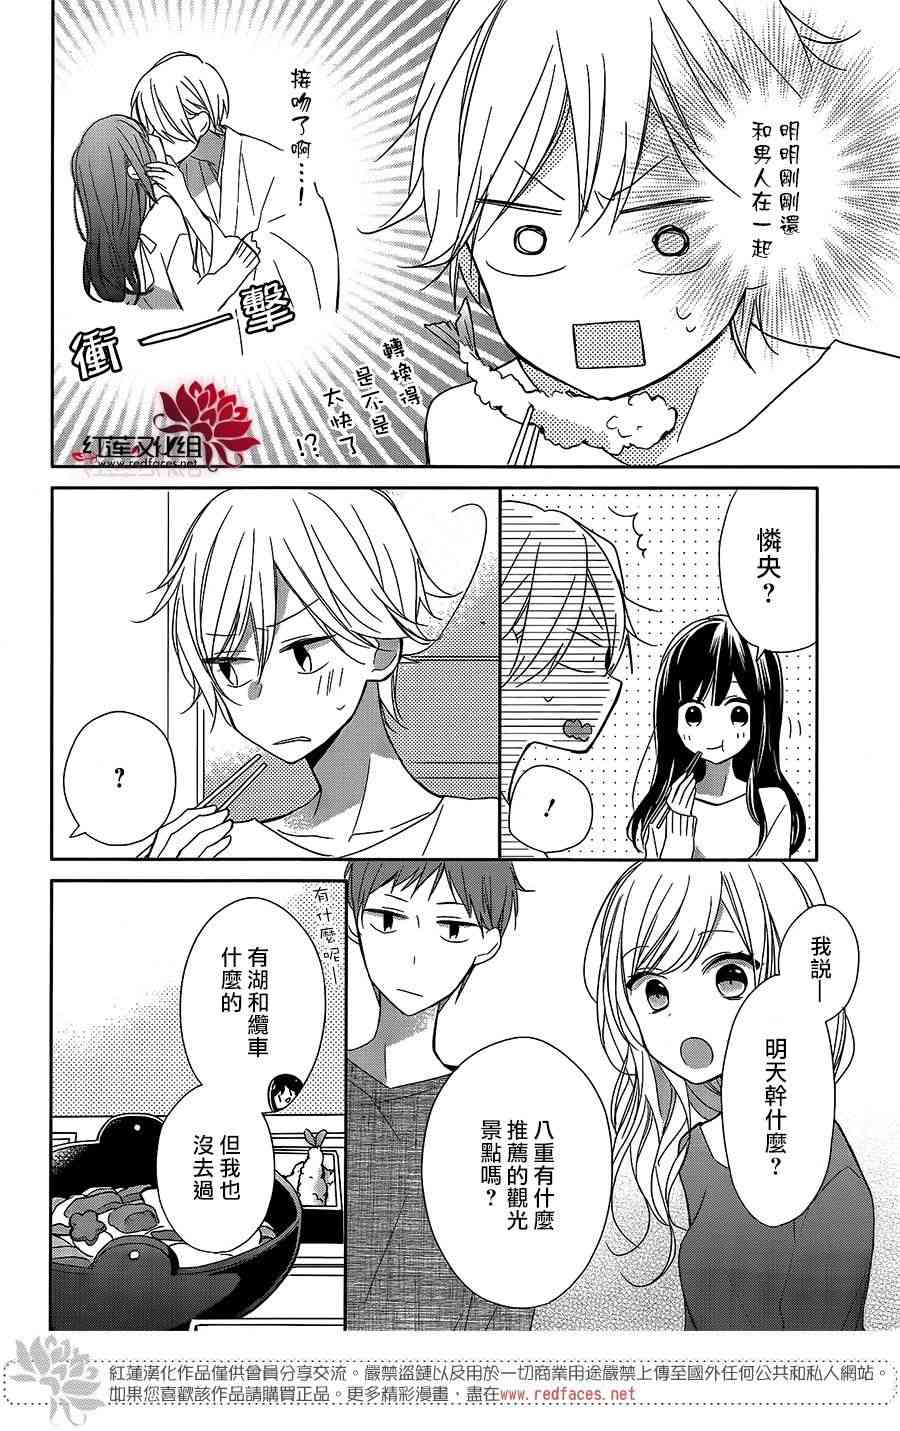 If given a second chance - 6話 - 3